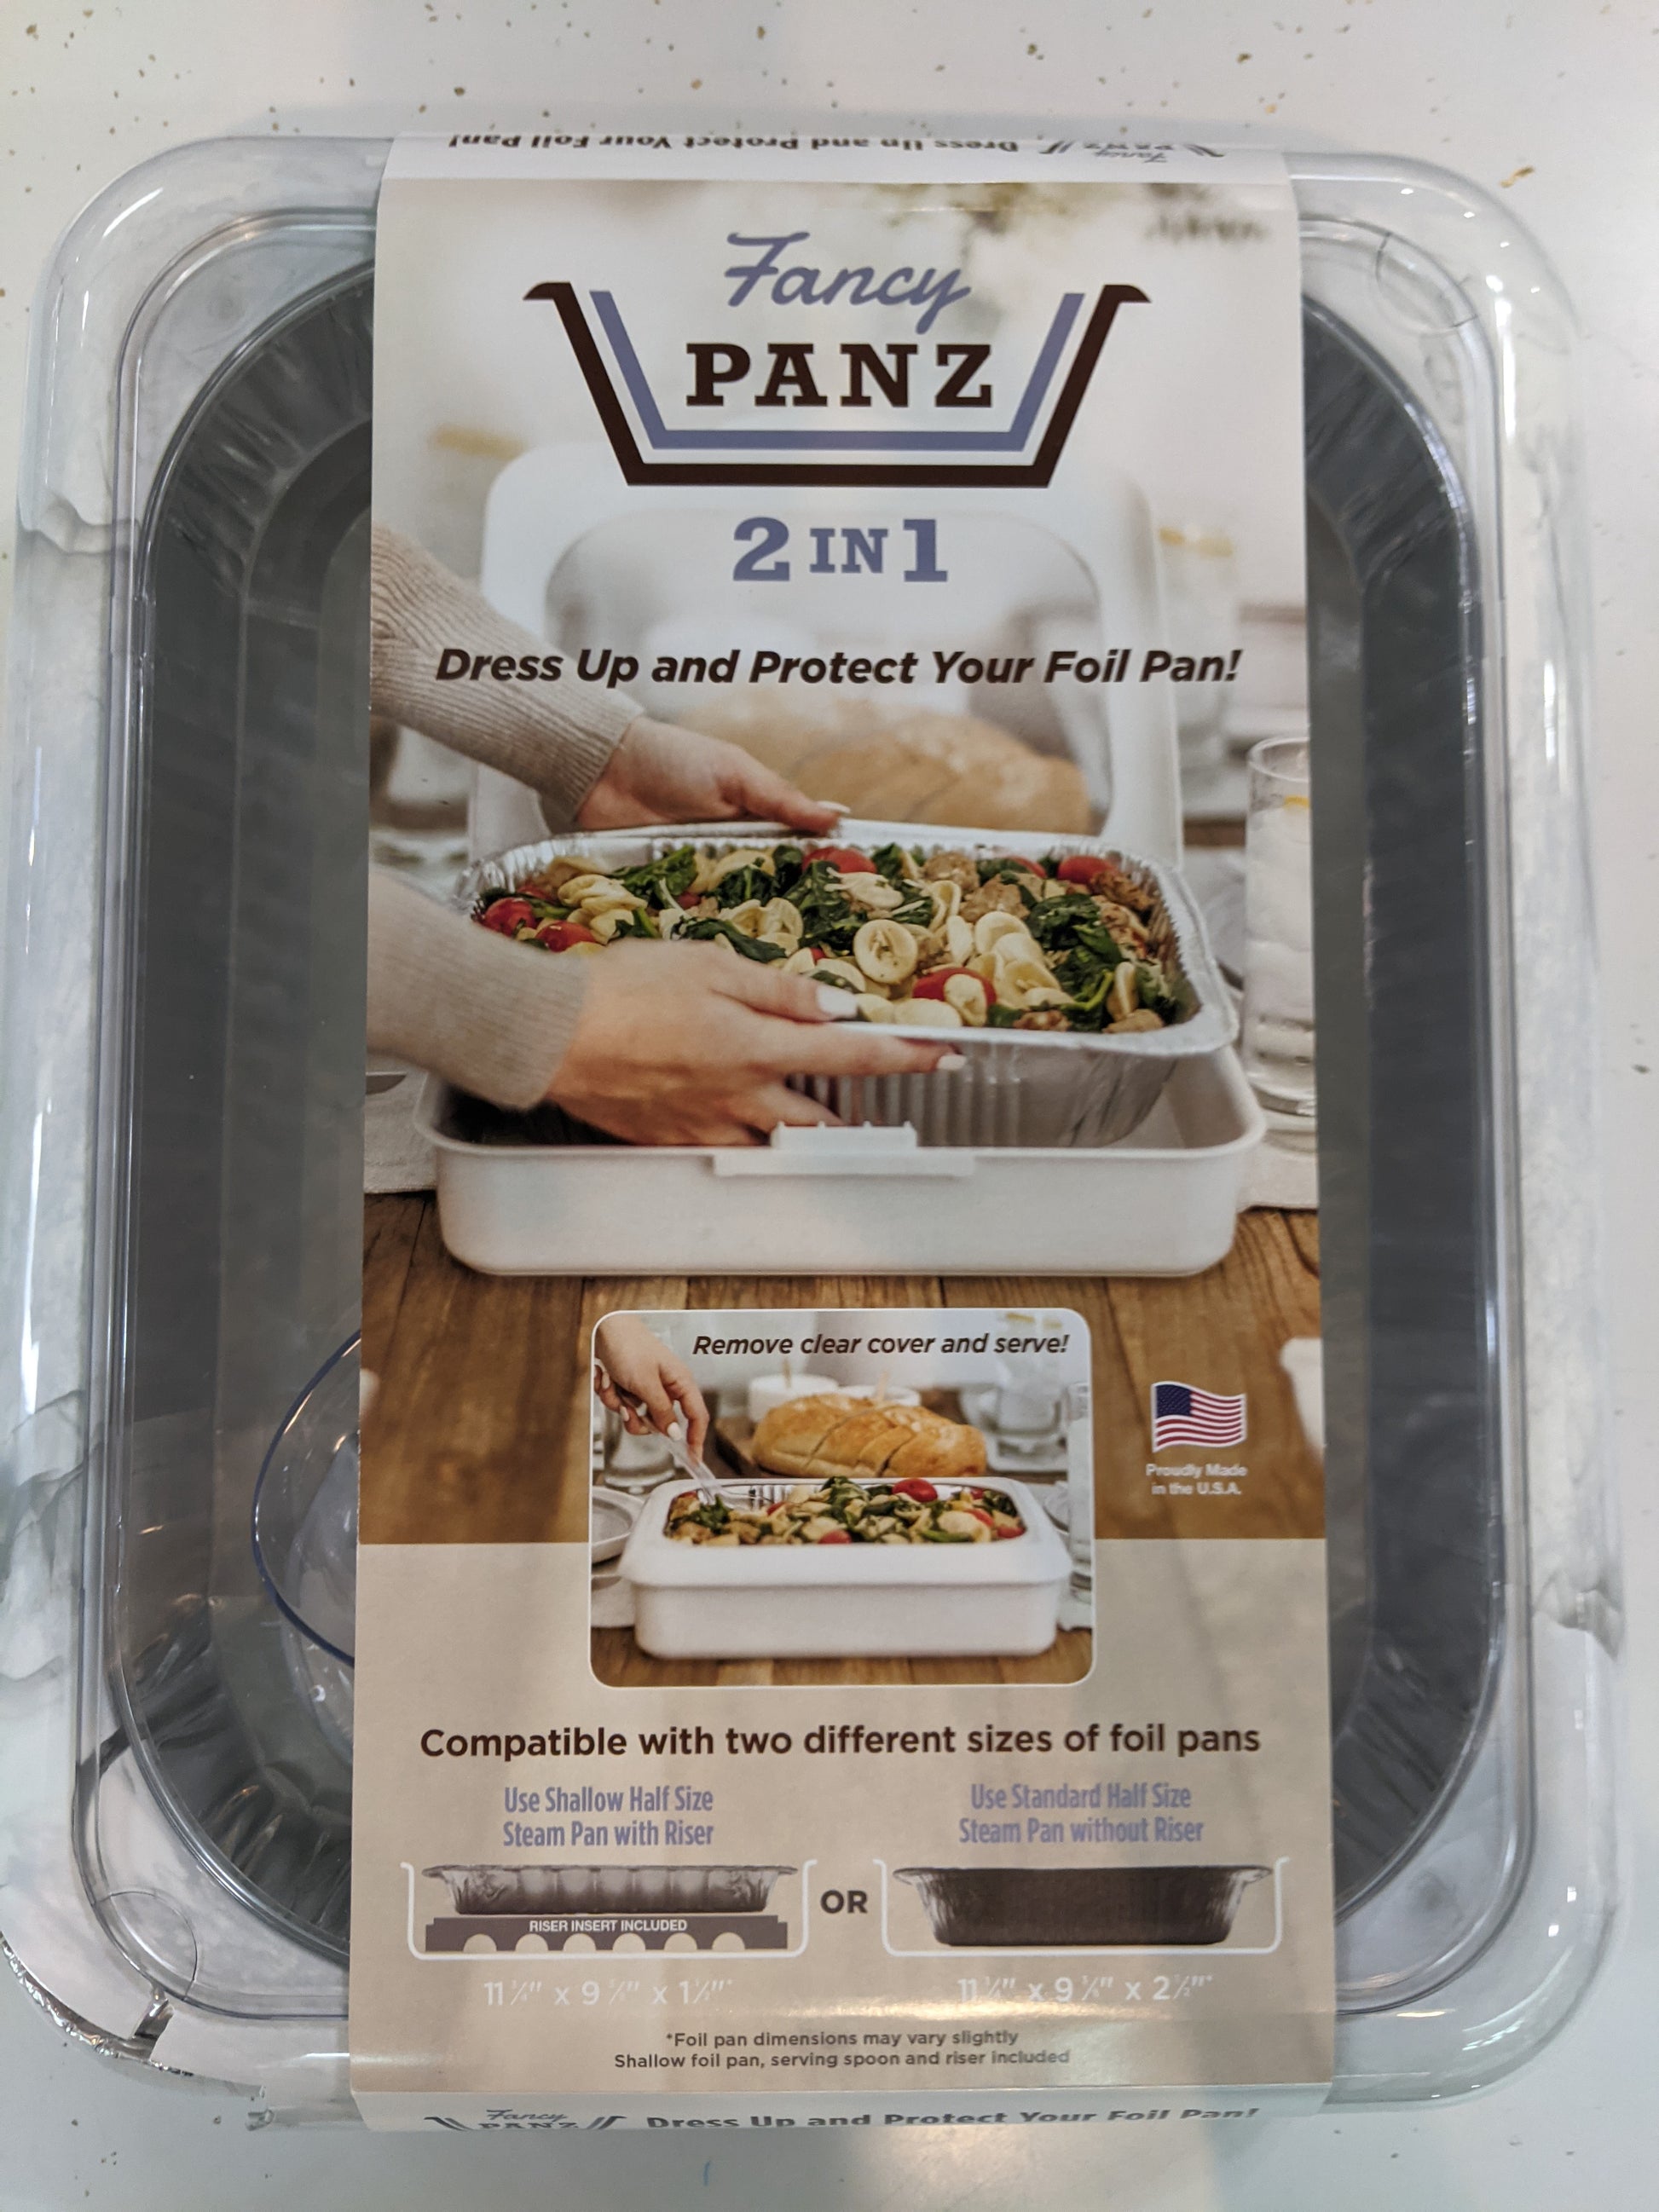 Fancy Panz 2 in 1 – Shop Holland House